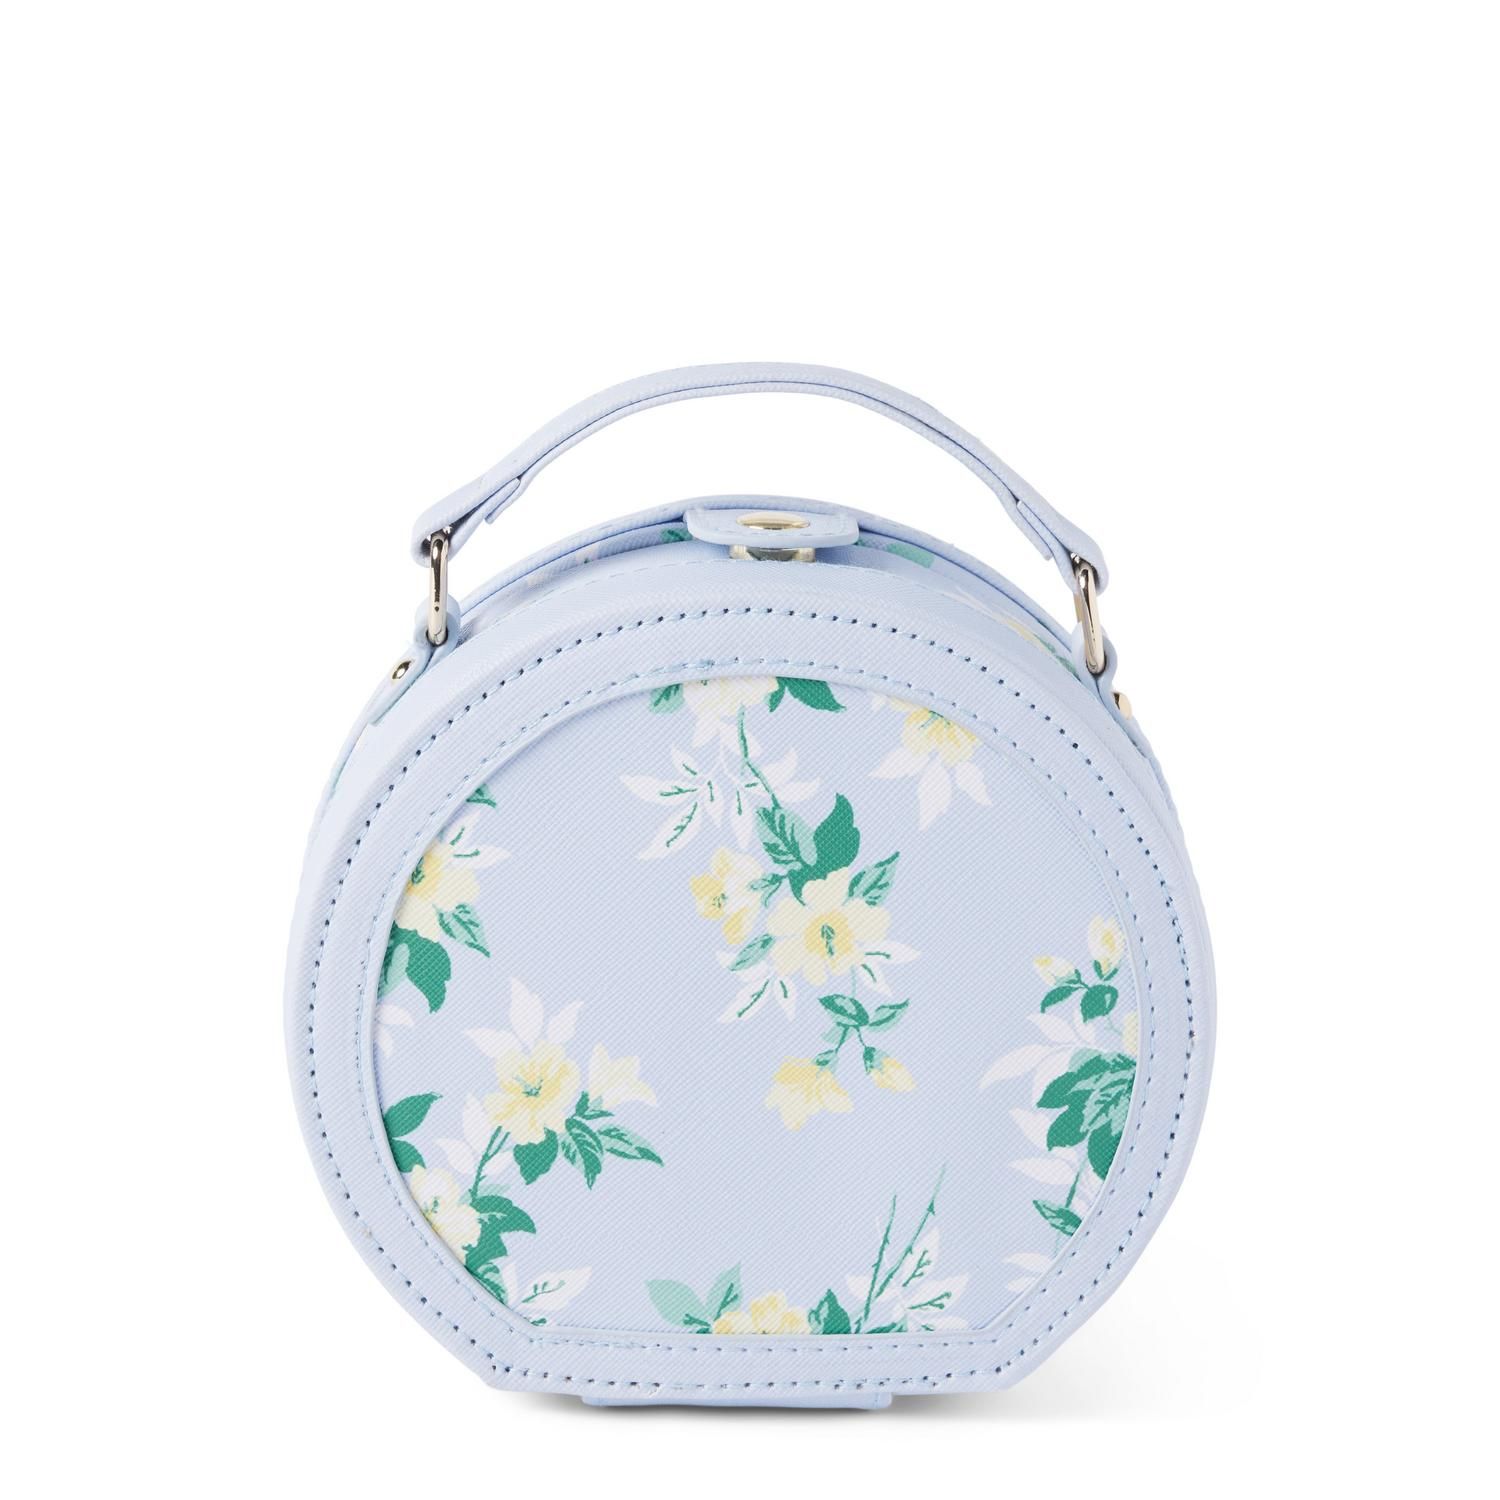 Floral Round Purse | Janie and Jack